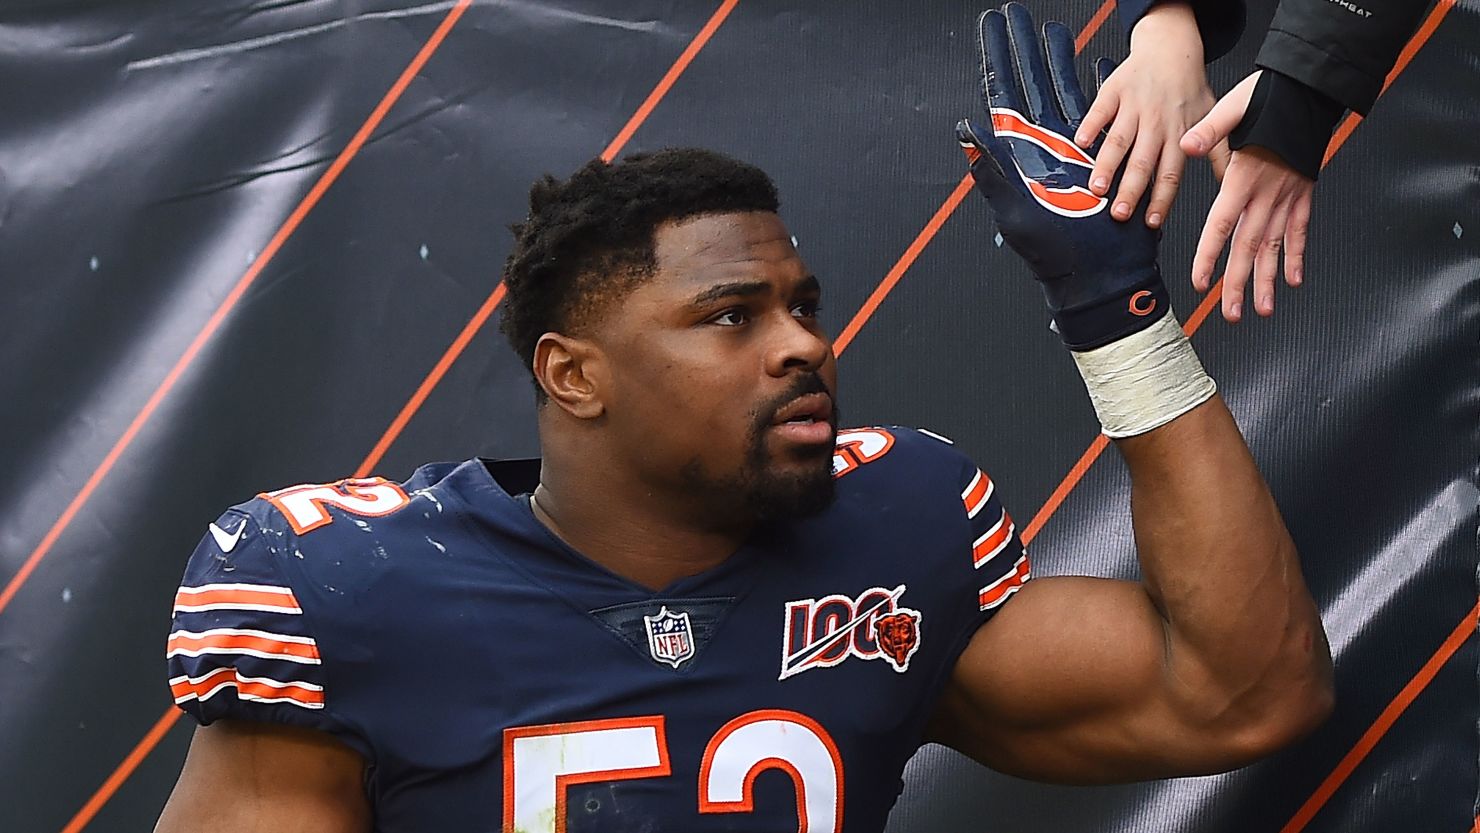 Khalil Mack greets fans following a game against the New York Giants in November.